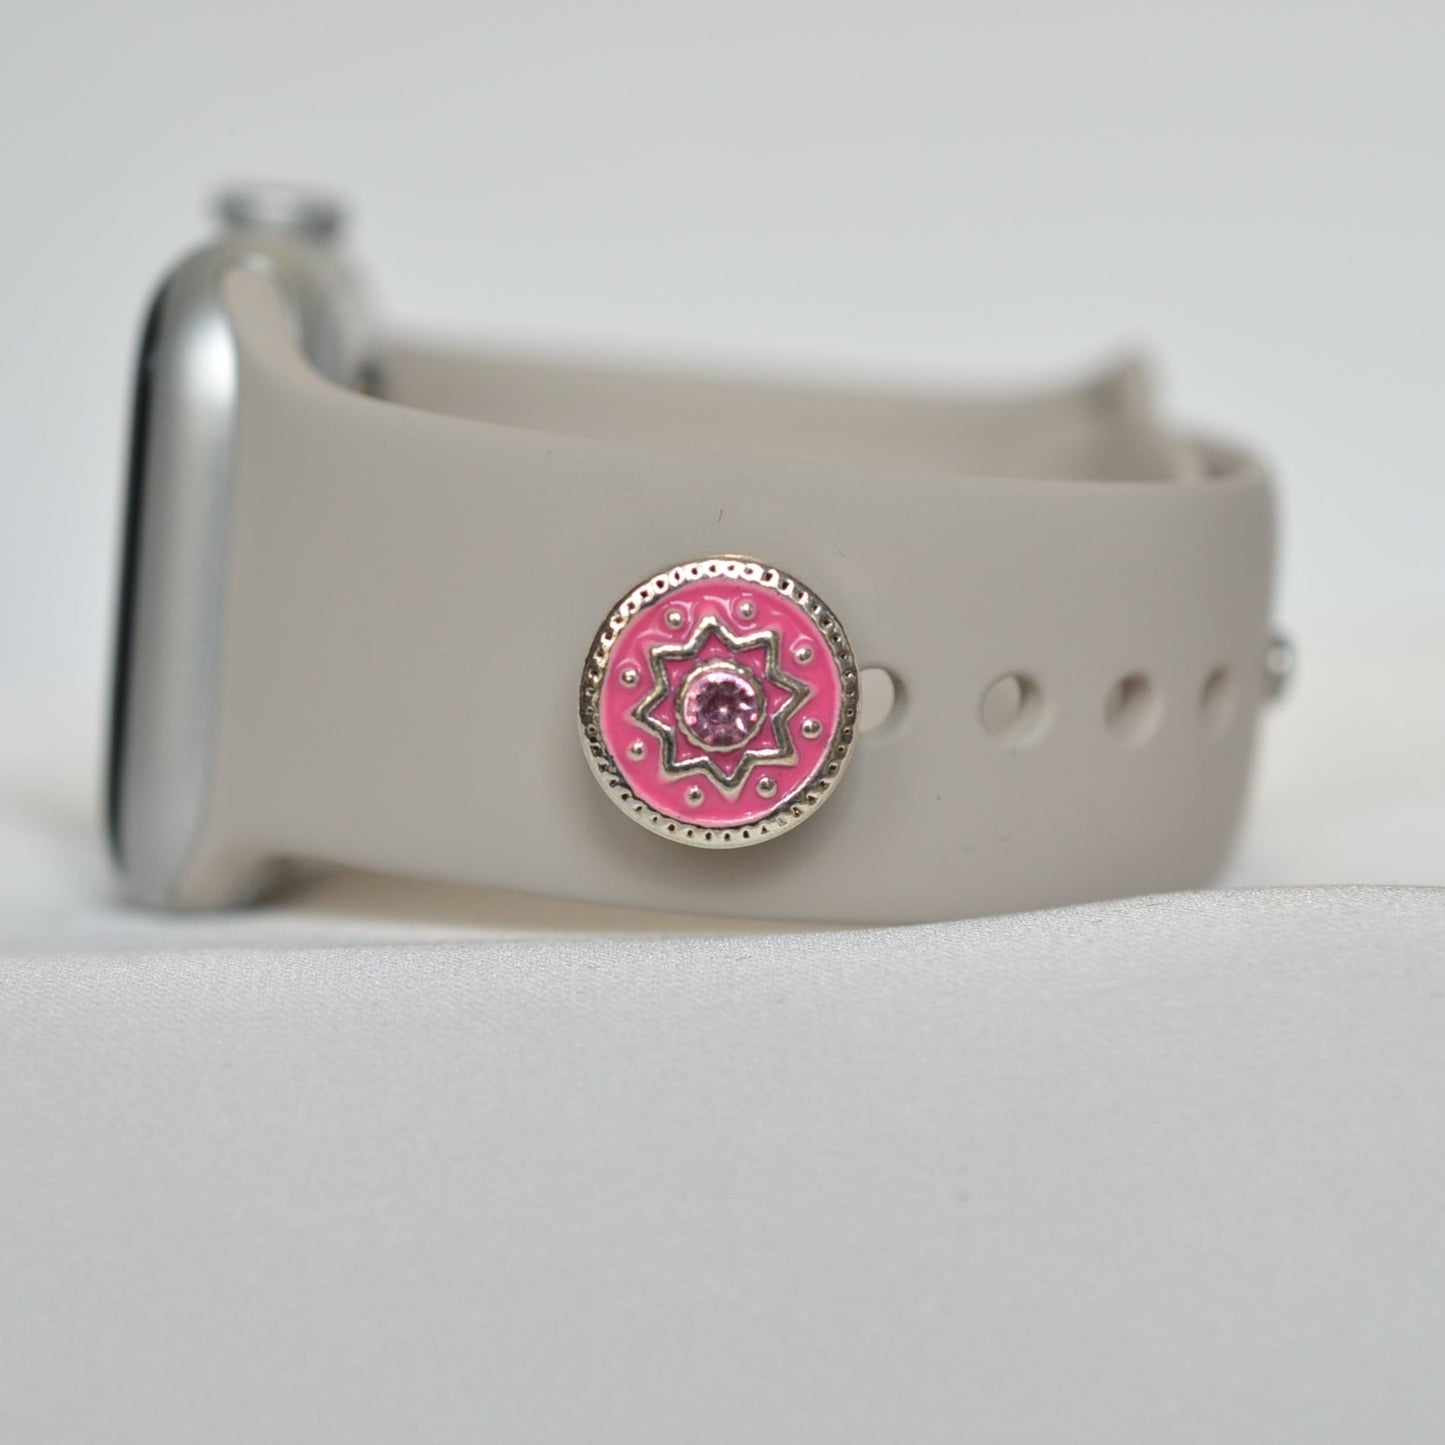 Bright Pink Design Charm for Belts and Watch Bands